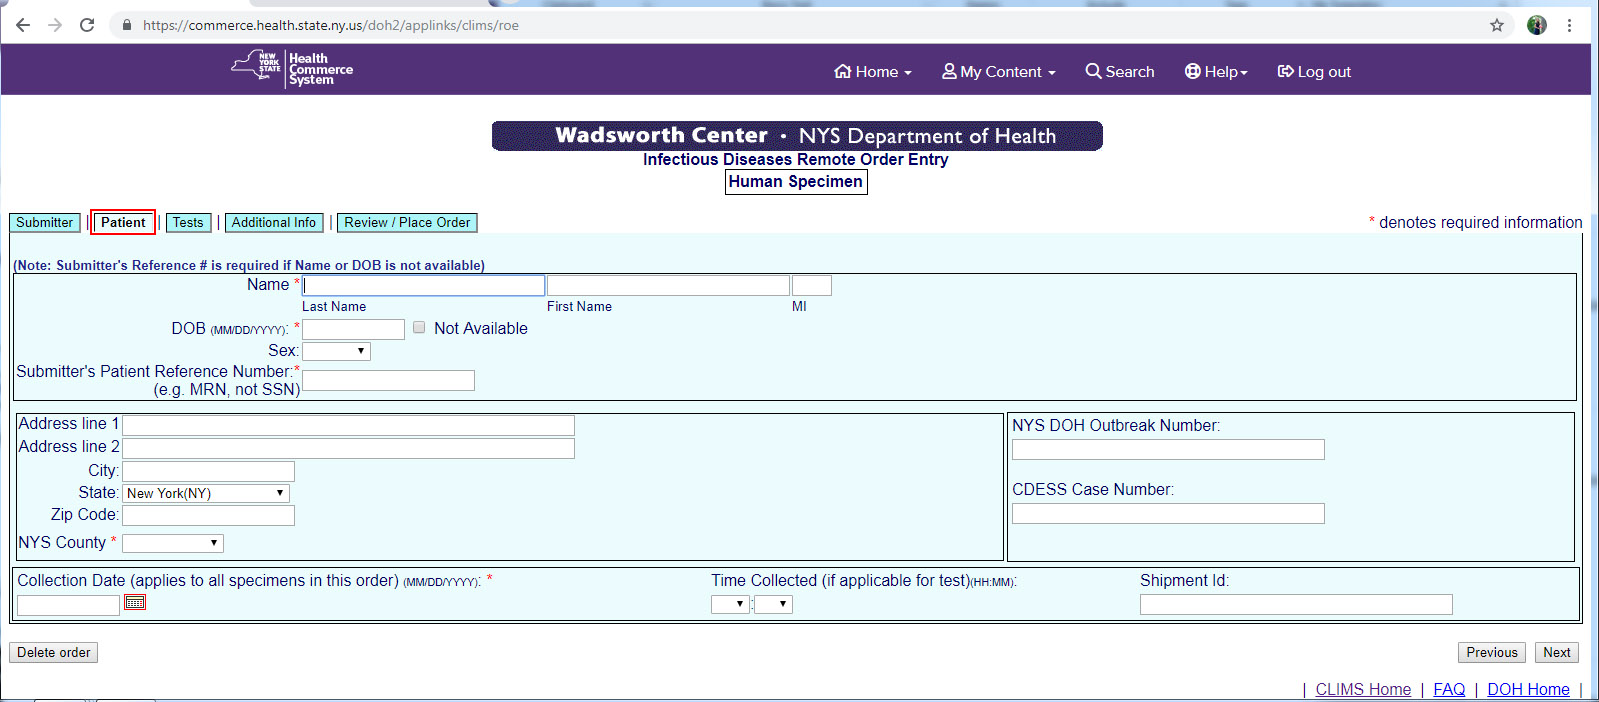 On the patient tab, complete the required fields, indicated with an asterisk ‘*’.